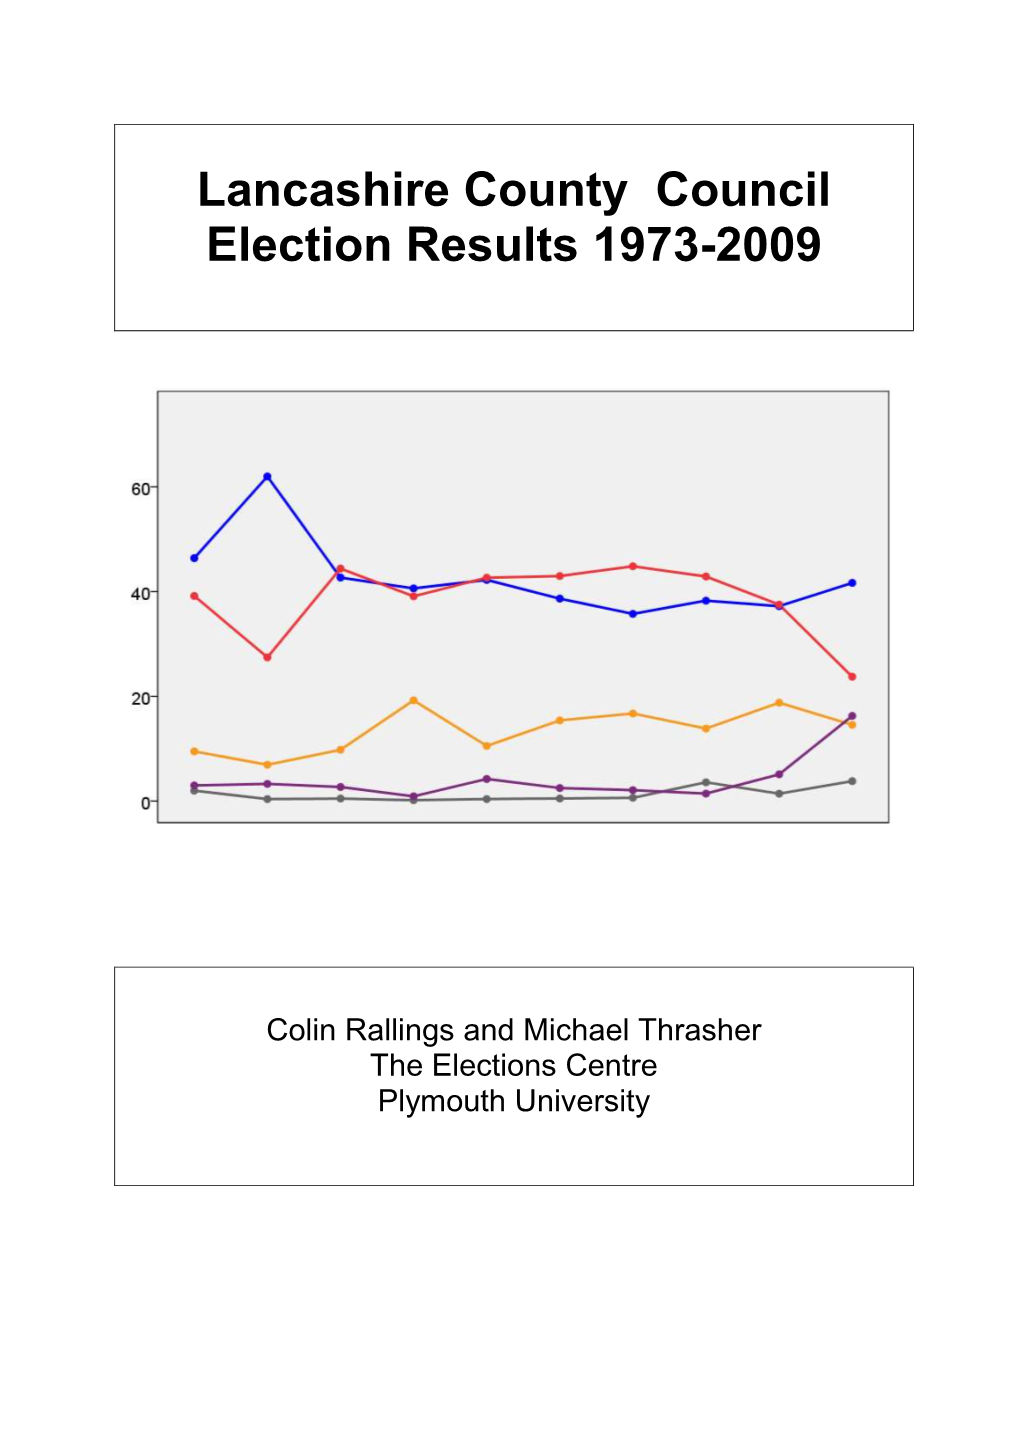 Lancashire County Council Election Results 1973-2009